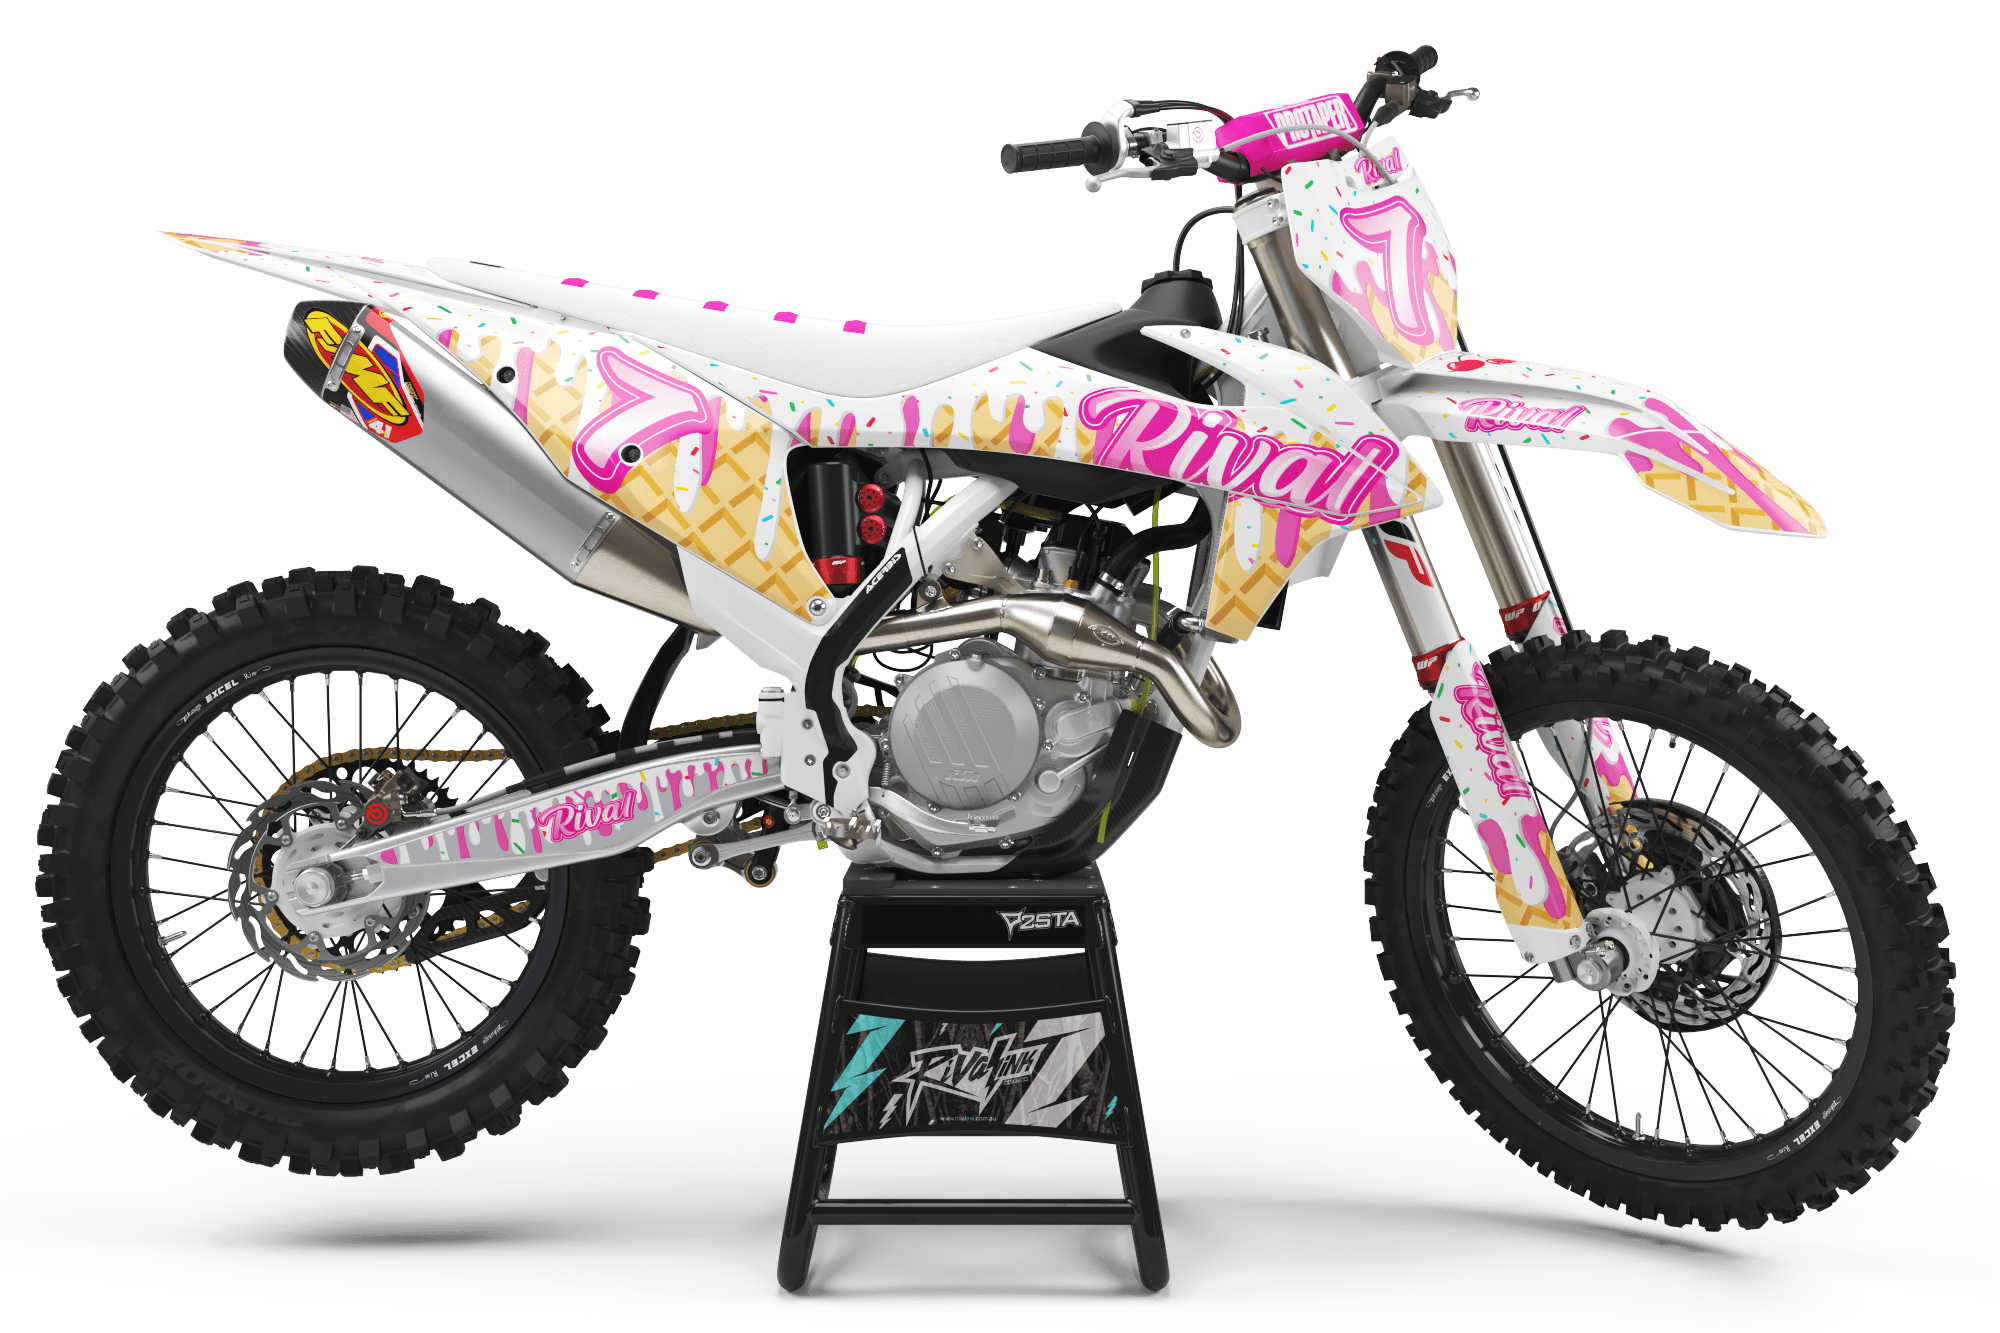 name stickers decals MX motocross pit bike gloss design 1 3 x Race number 